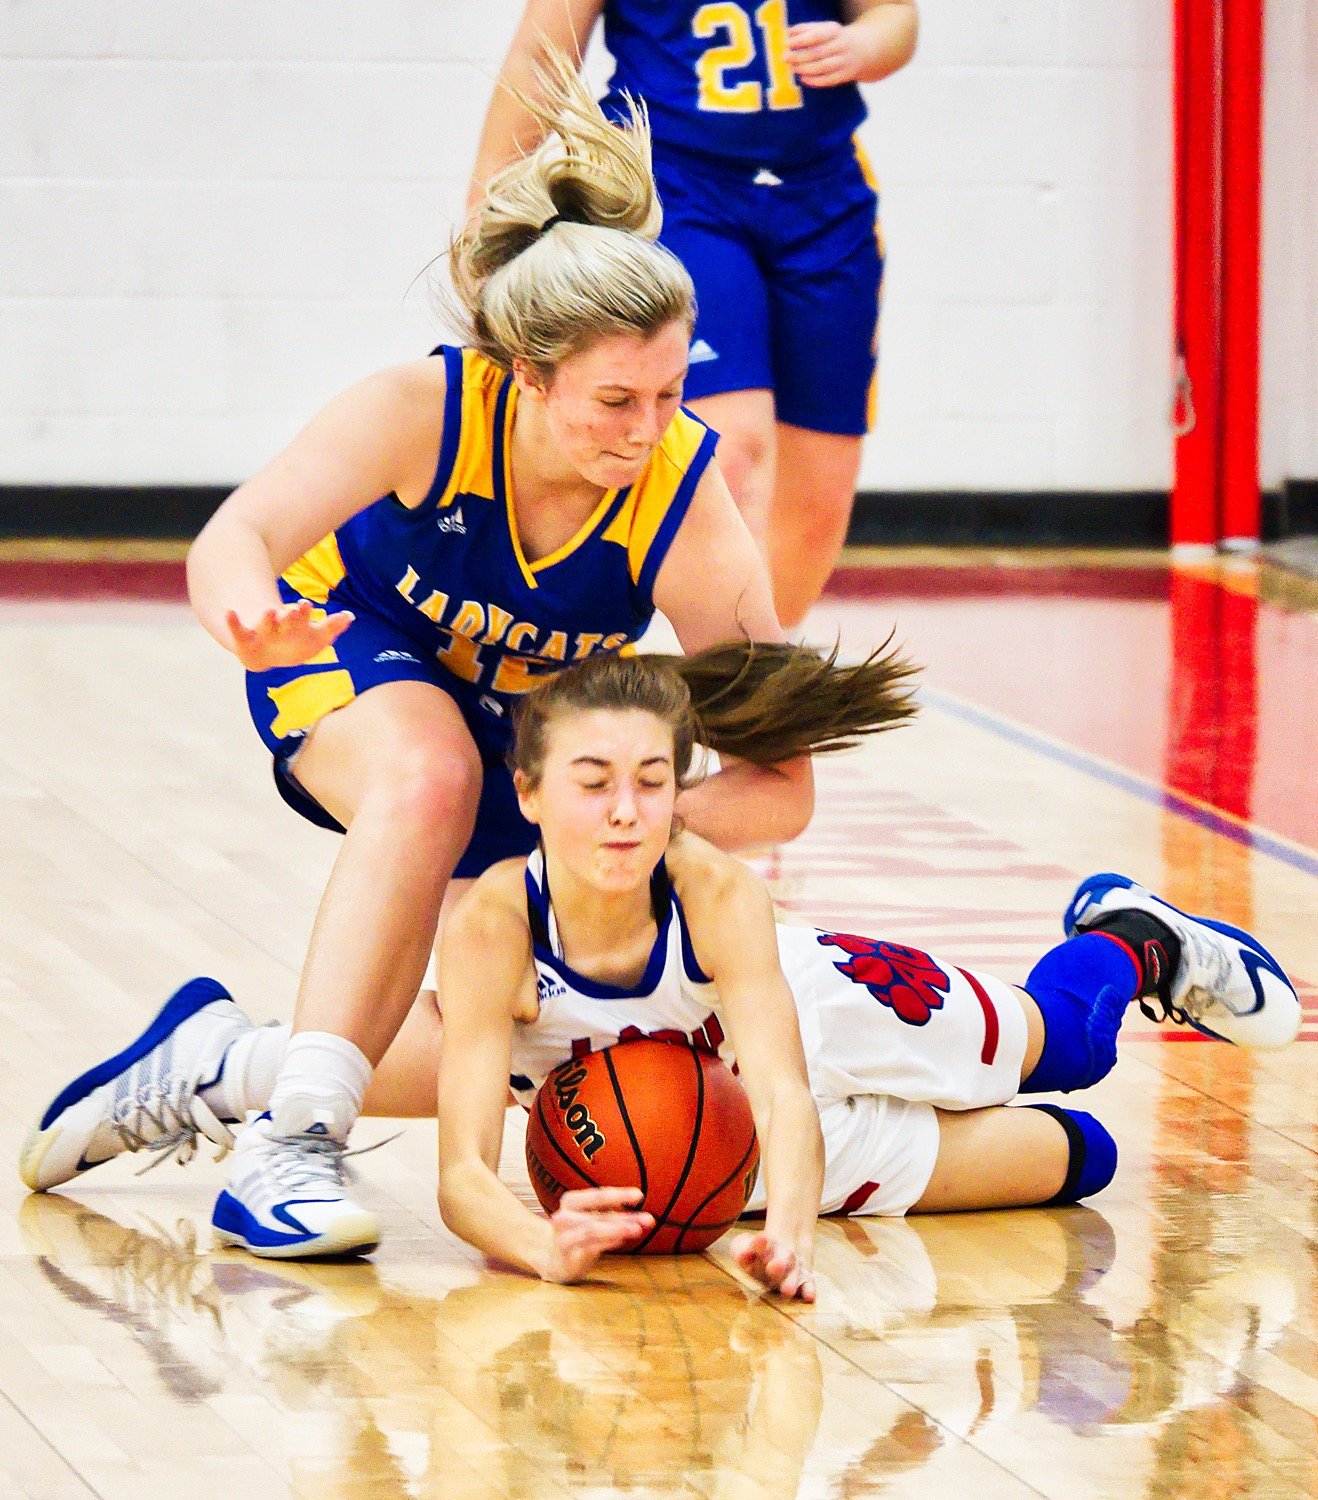 Karmin Wright (bottom, right) fights for a loose ball on the hardwood. [see more shots + purchase prints]